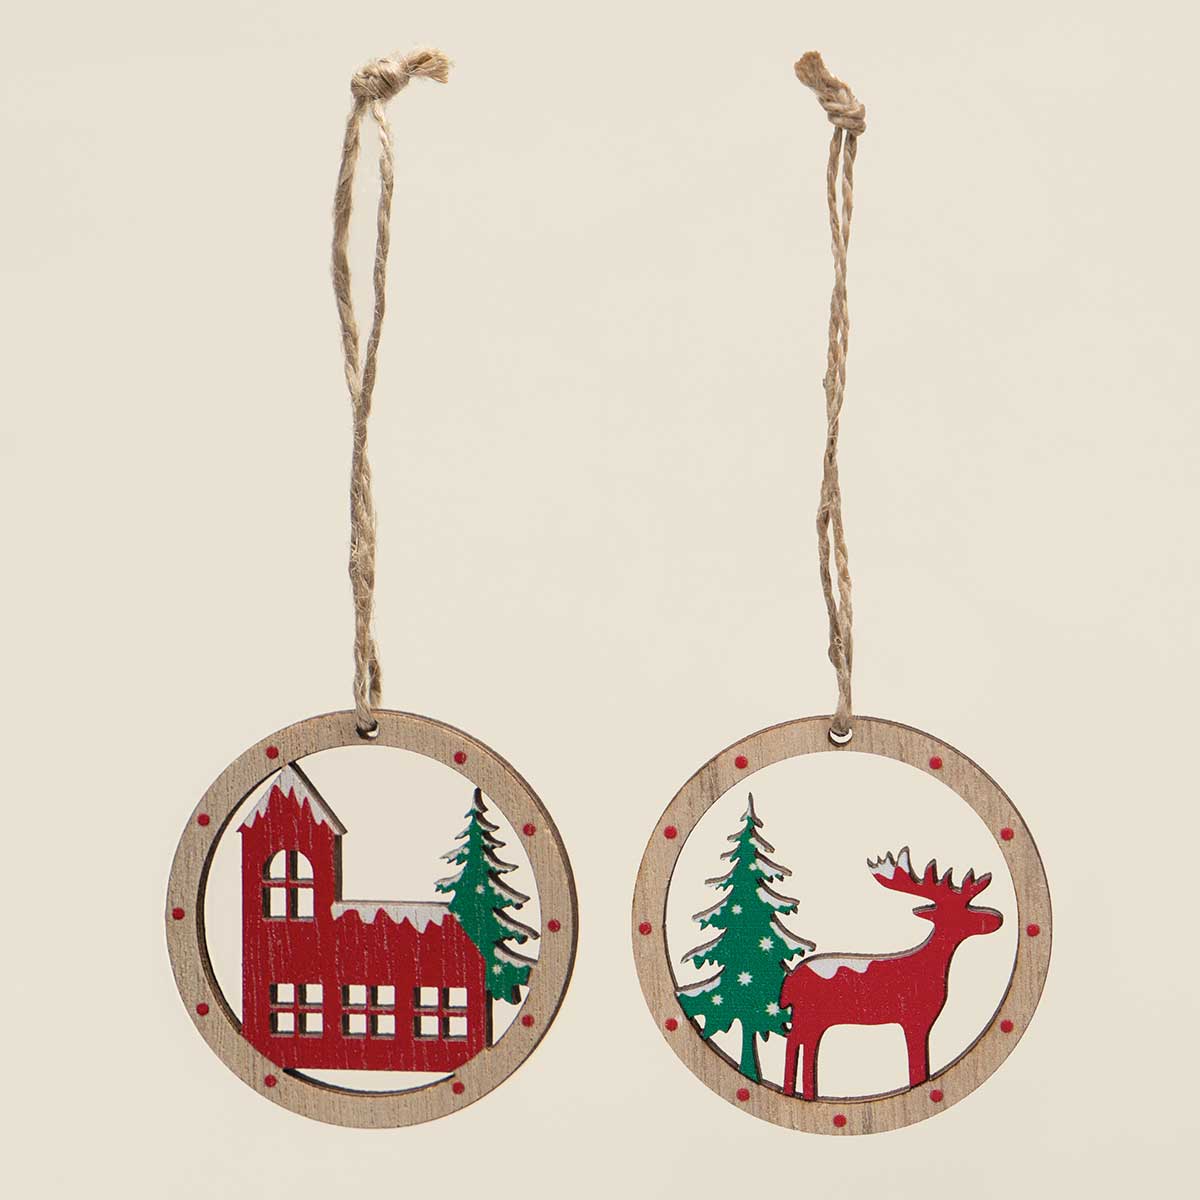 !ALPINE HOUSE AND REINDEER WOOD ORNAMENT RED/GREEN